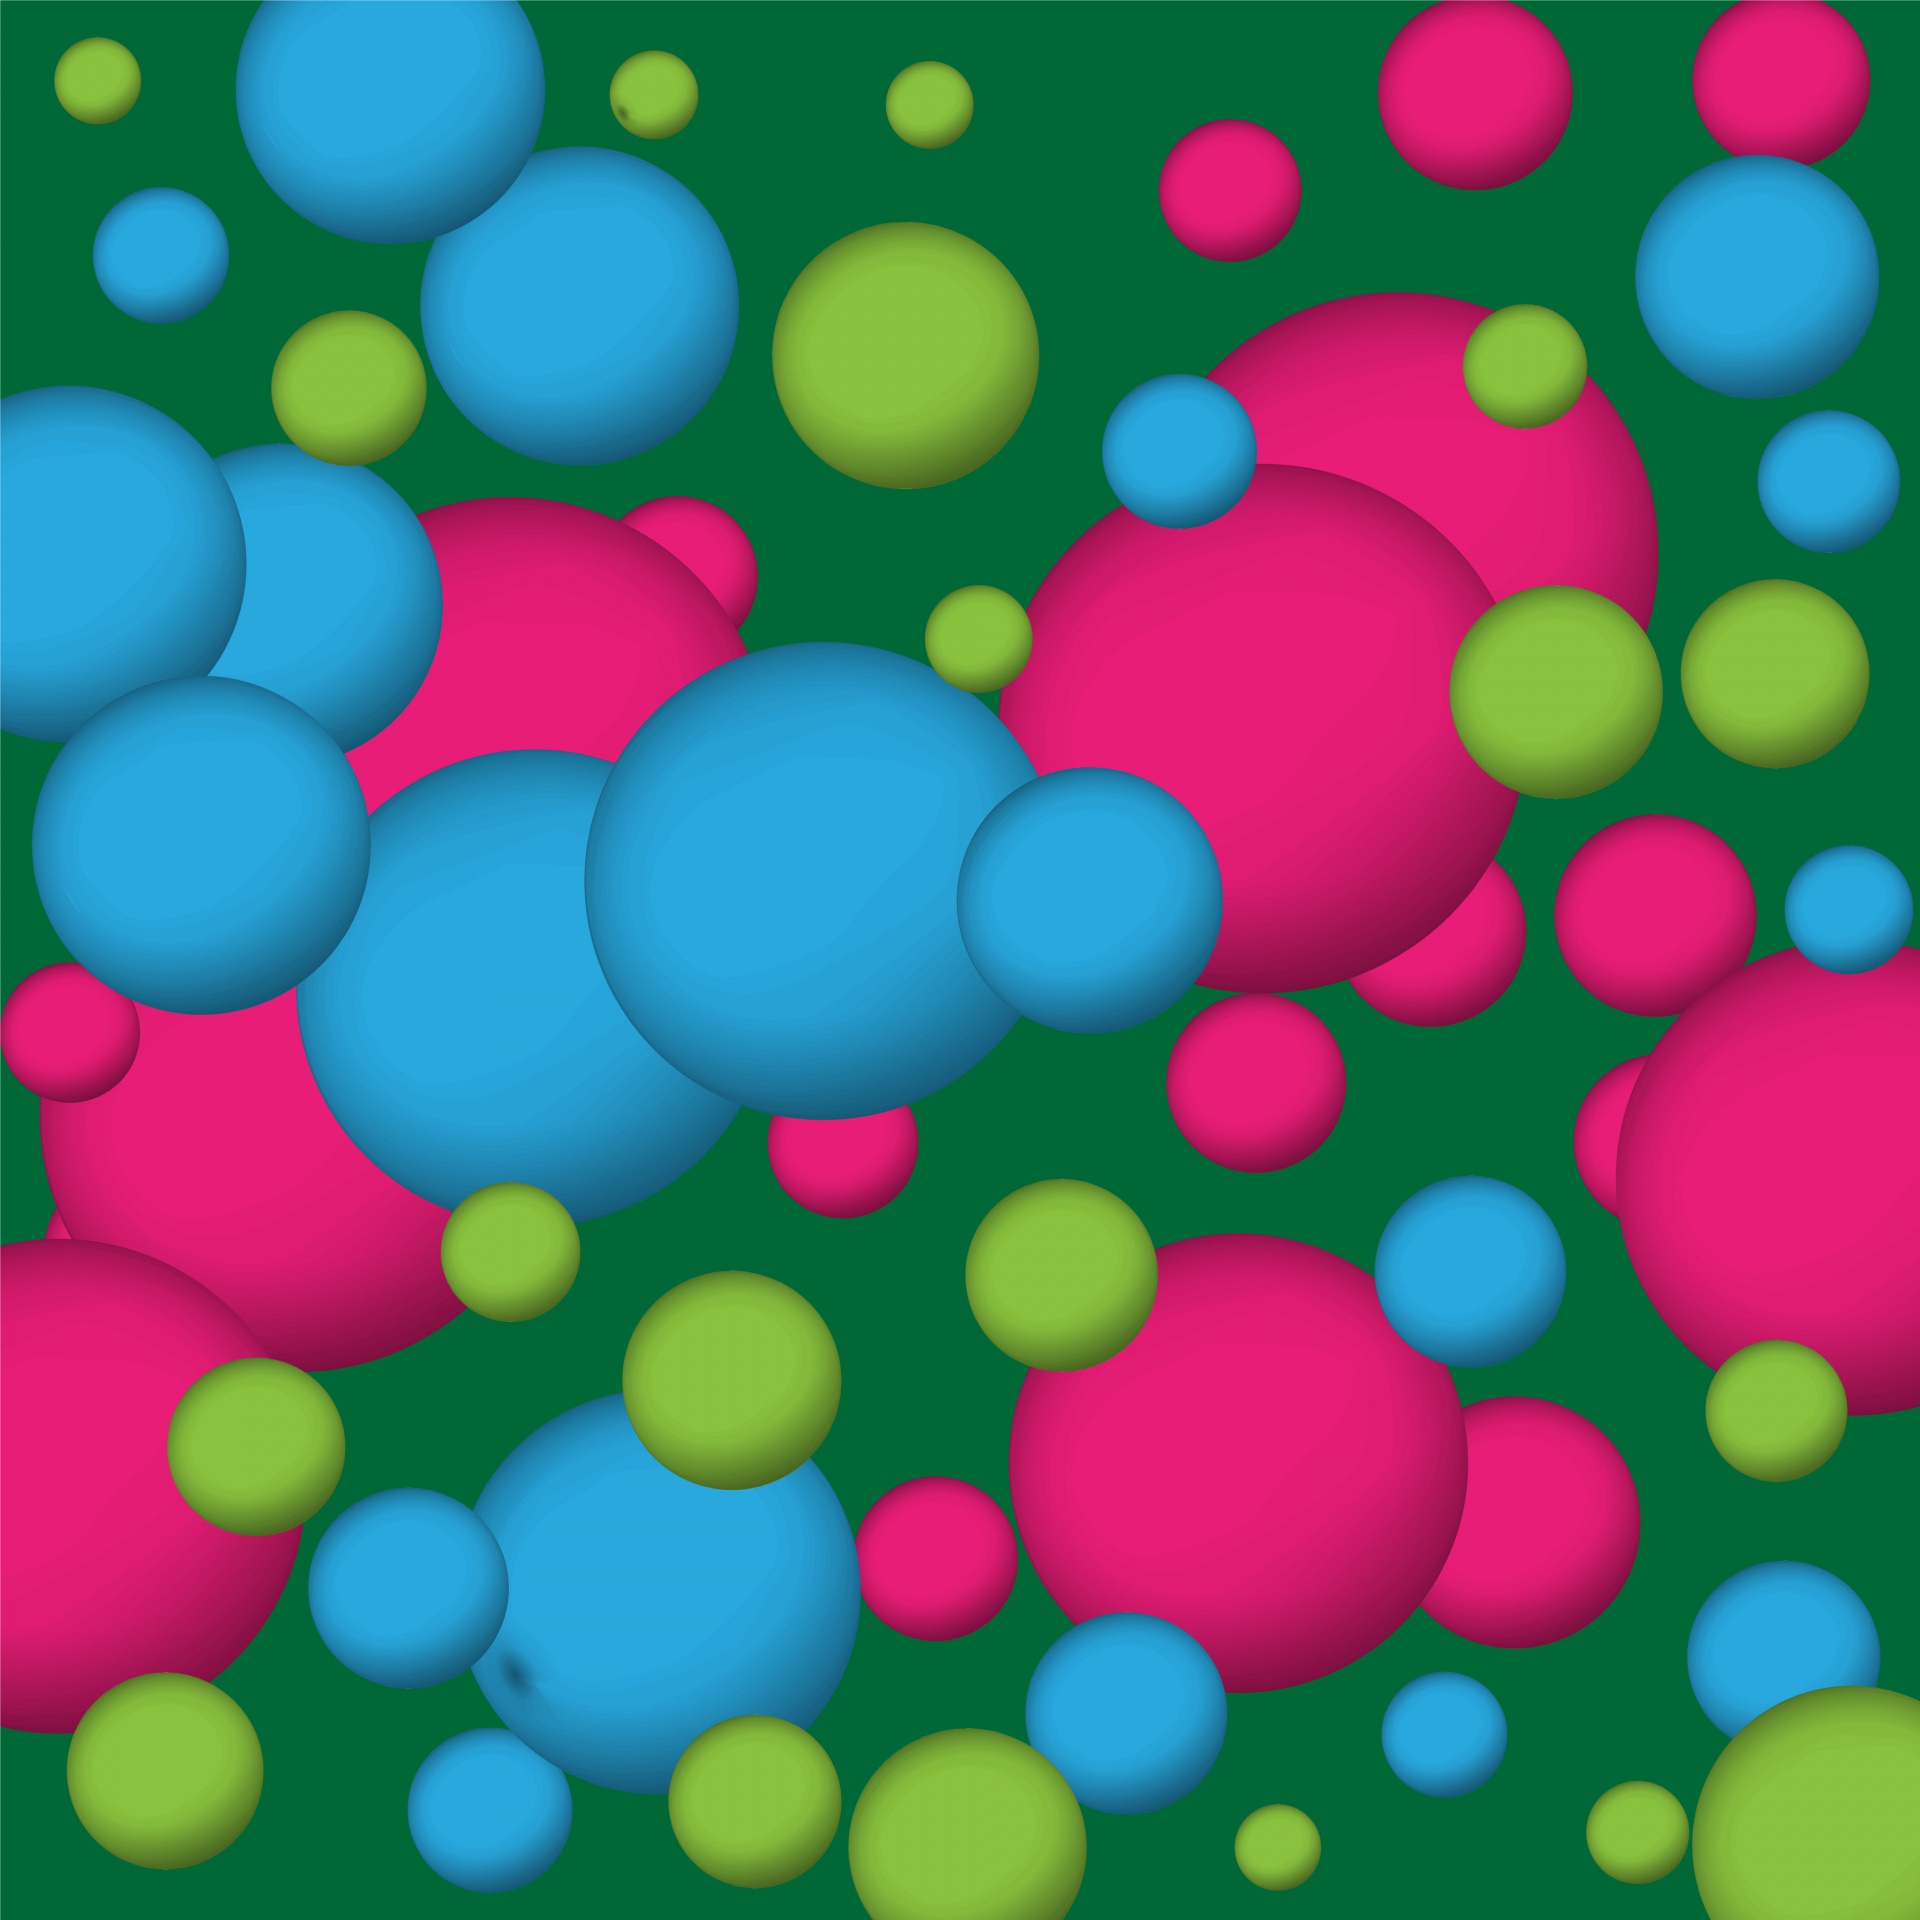 Floating Colorful 3D Background